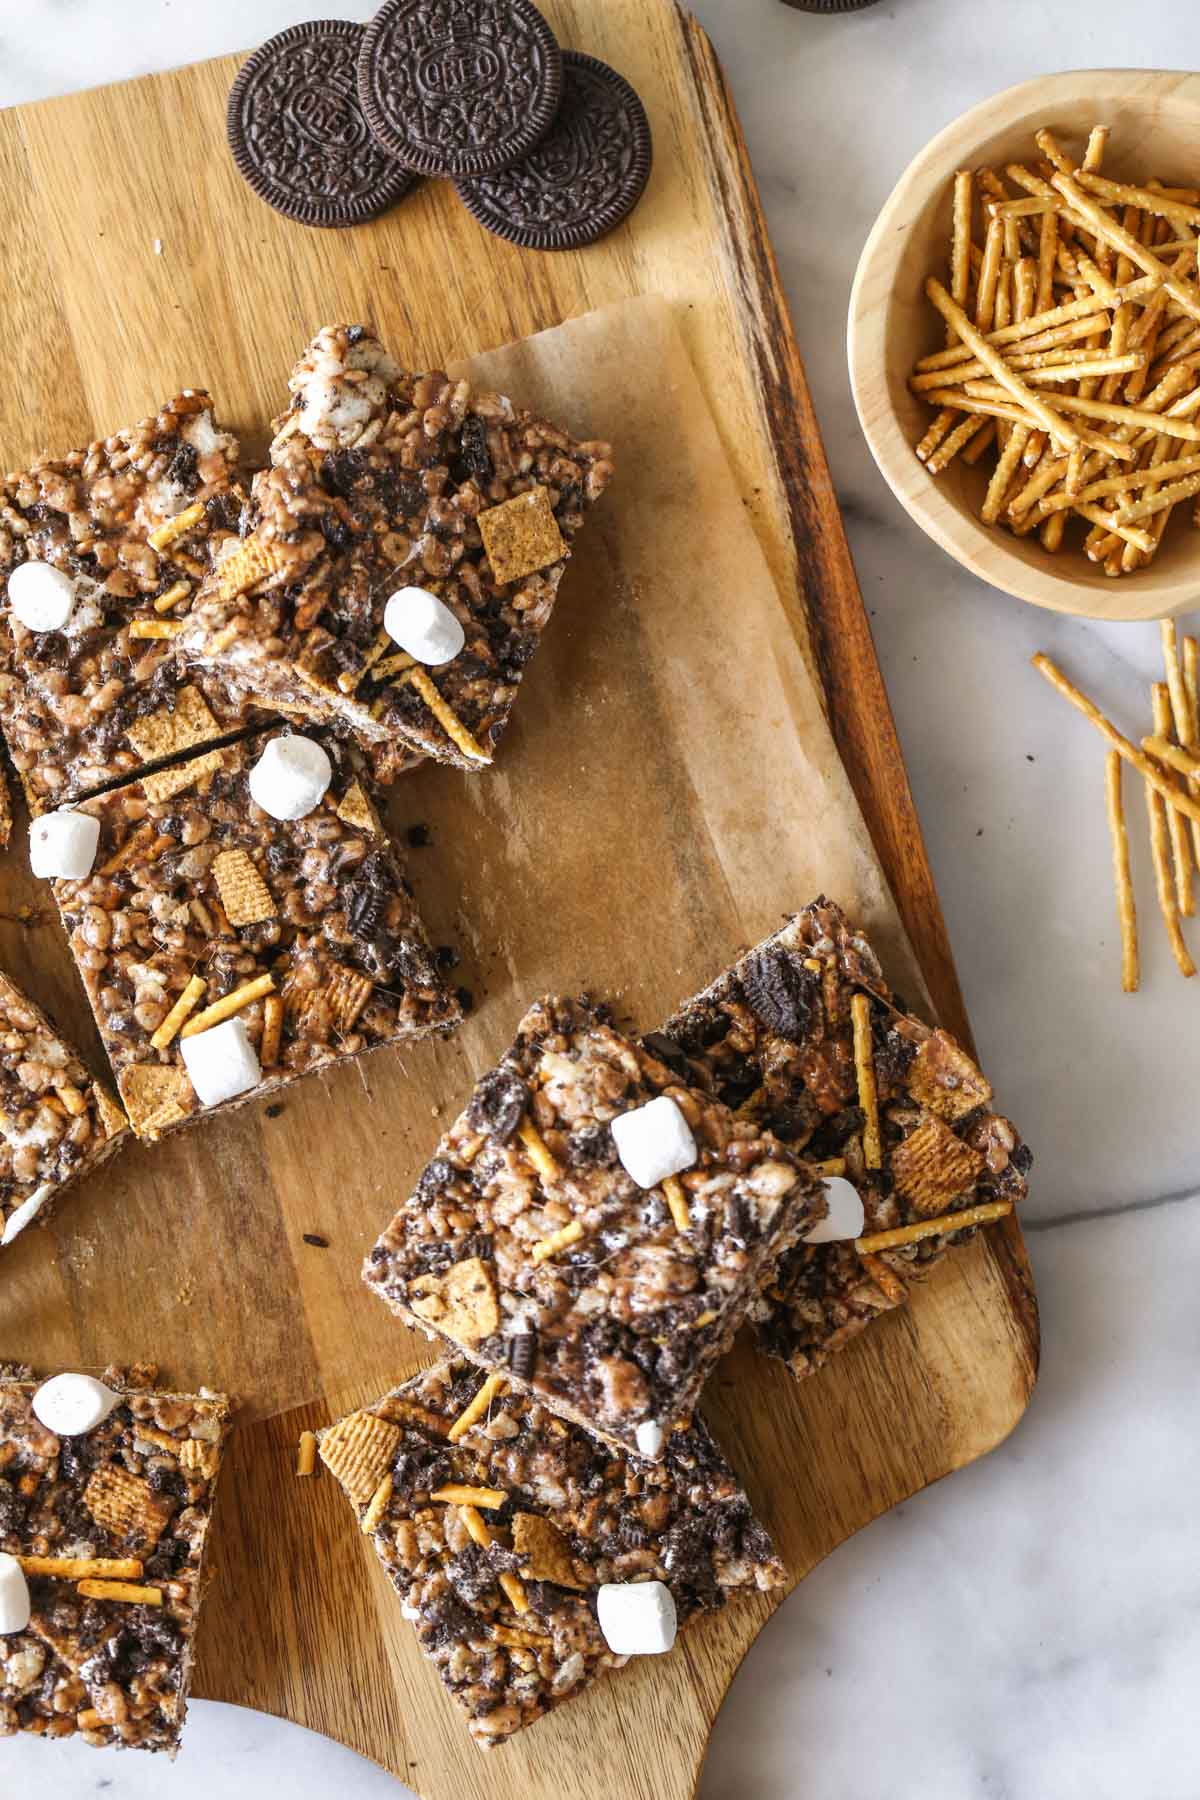 Overhead shot of cut S'more Bars on parchment paper on a wood cutting board, with some whole Oreo cookies and a small wood bowl of pretzel sticks next to it.